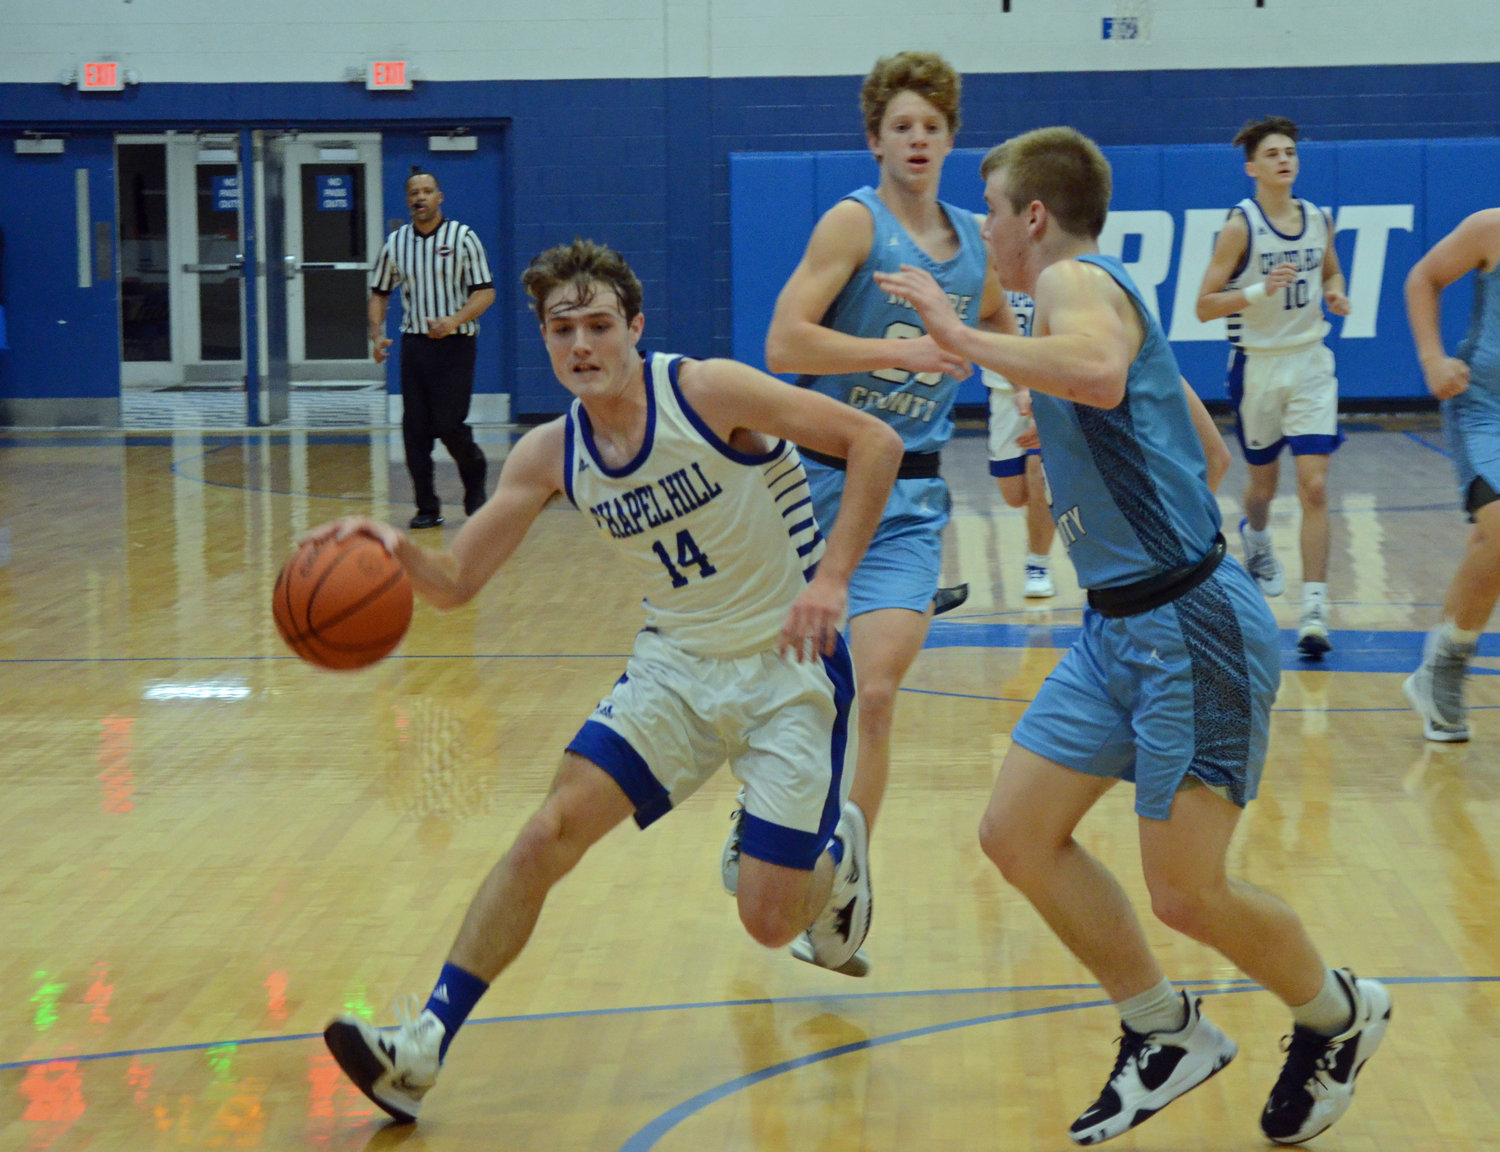 Hunter Bennett (14) led the Rockets in the scoring column with 11 points Tuesday night versus Moore County.